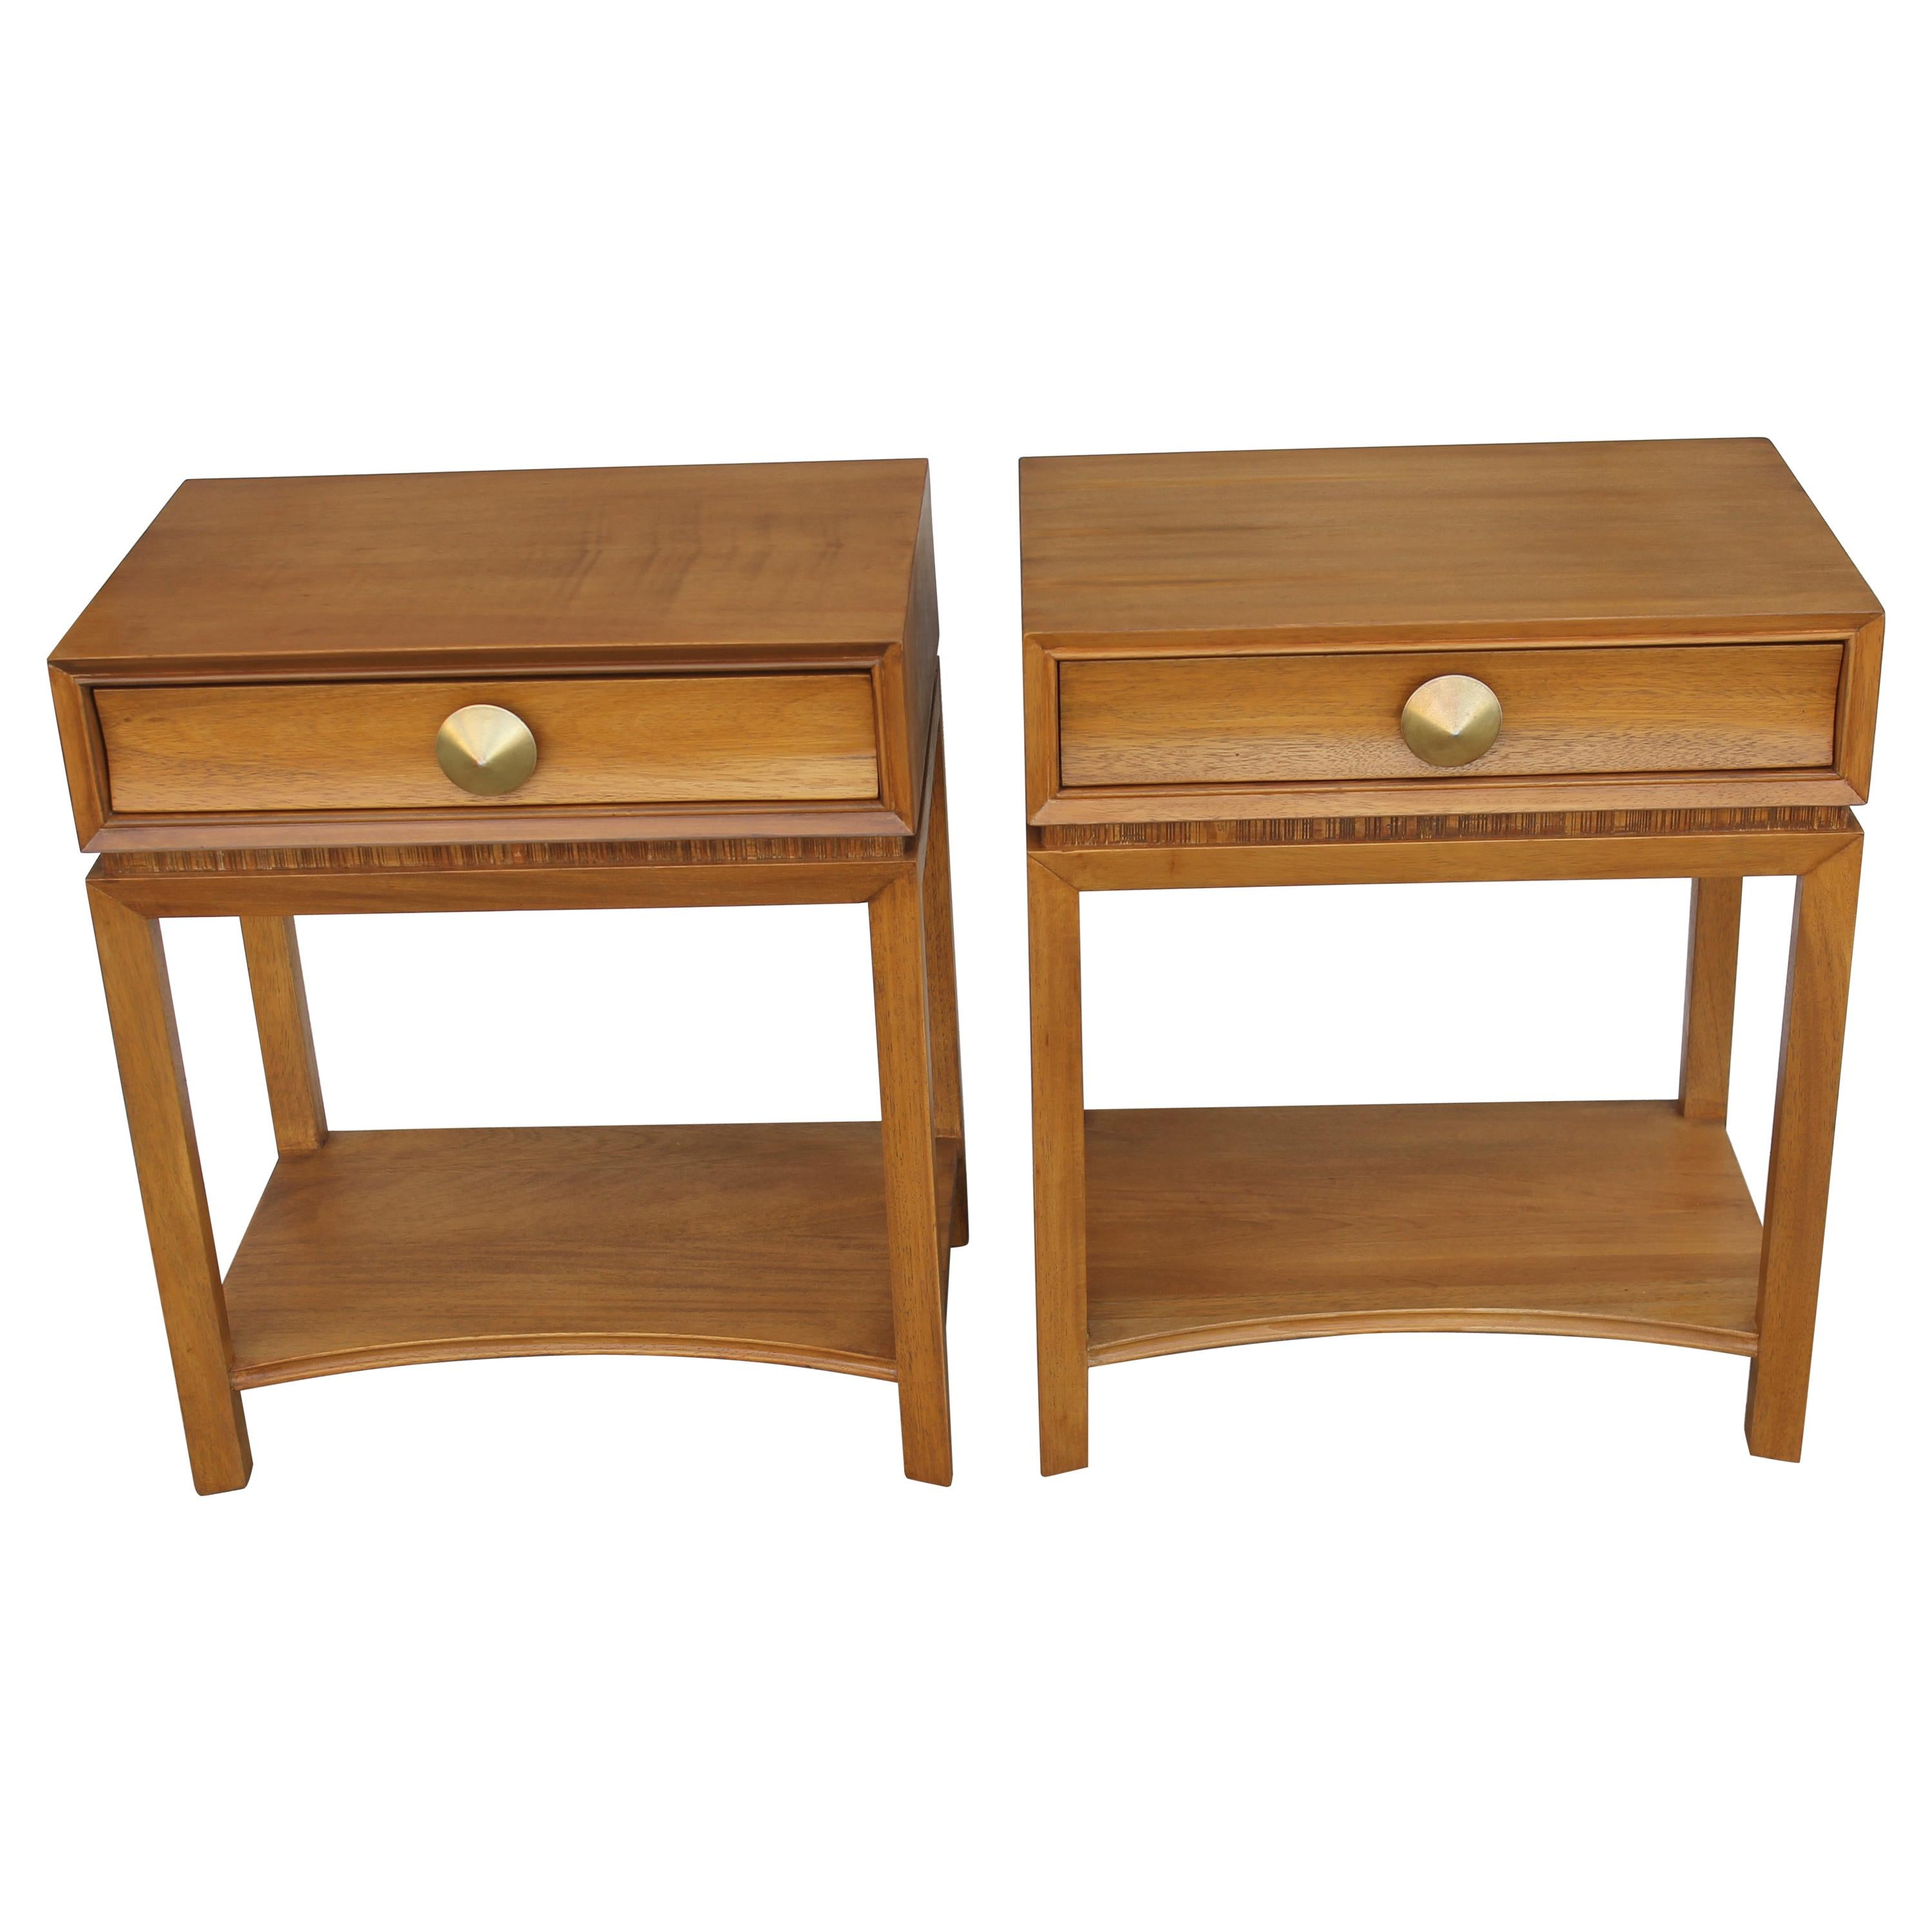 Pair of Side Tables by Paul Frankl for Brown Saltman